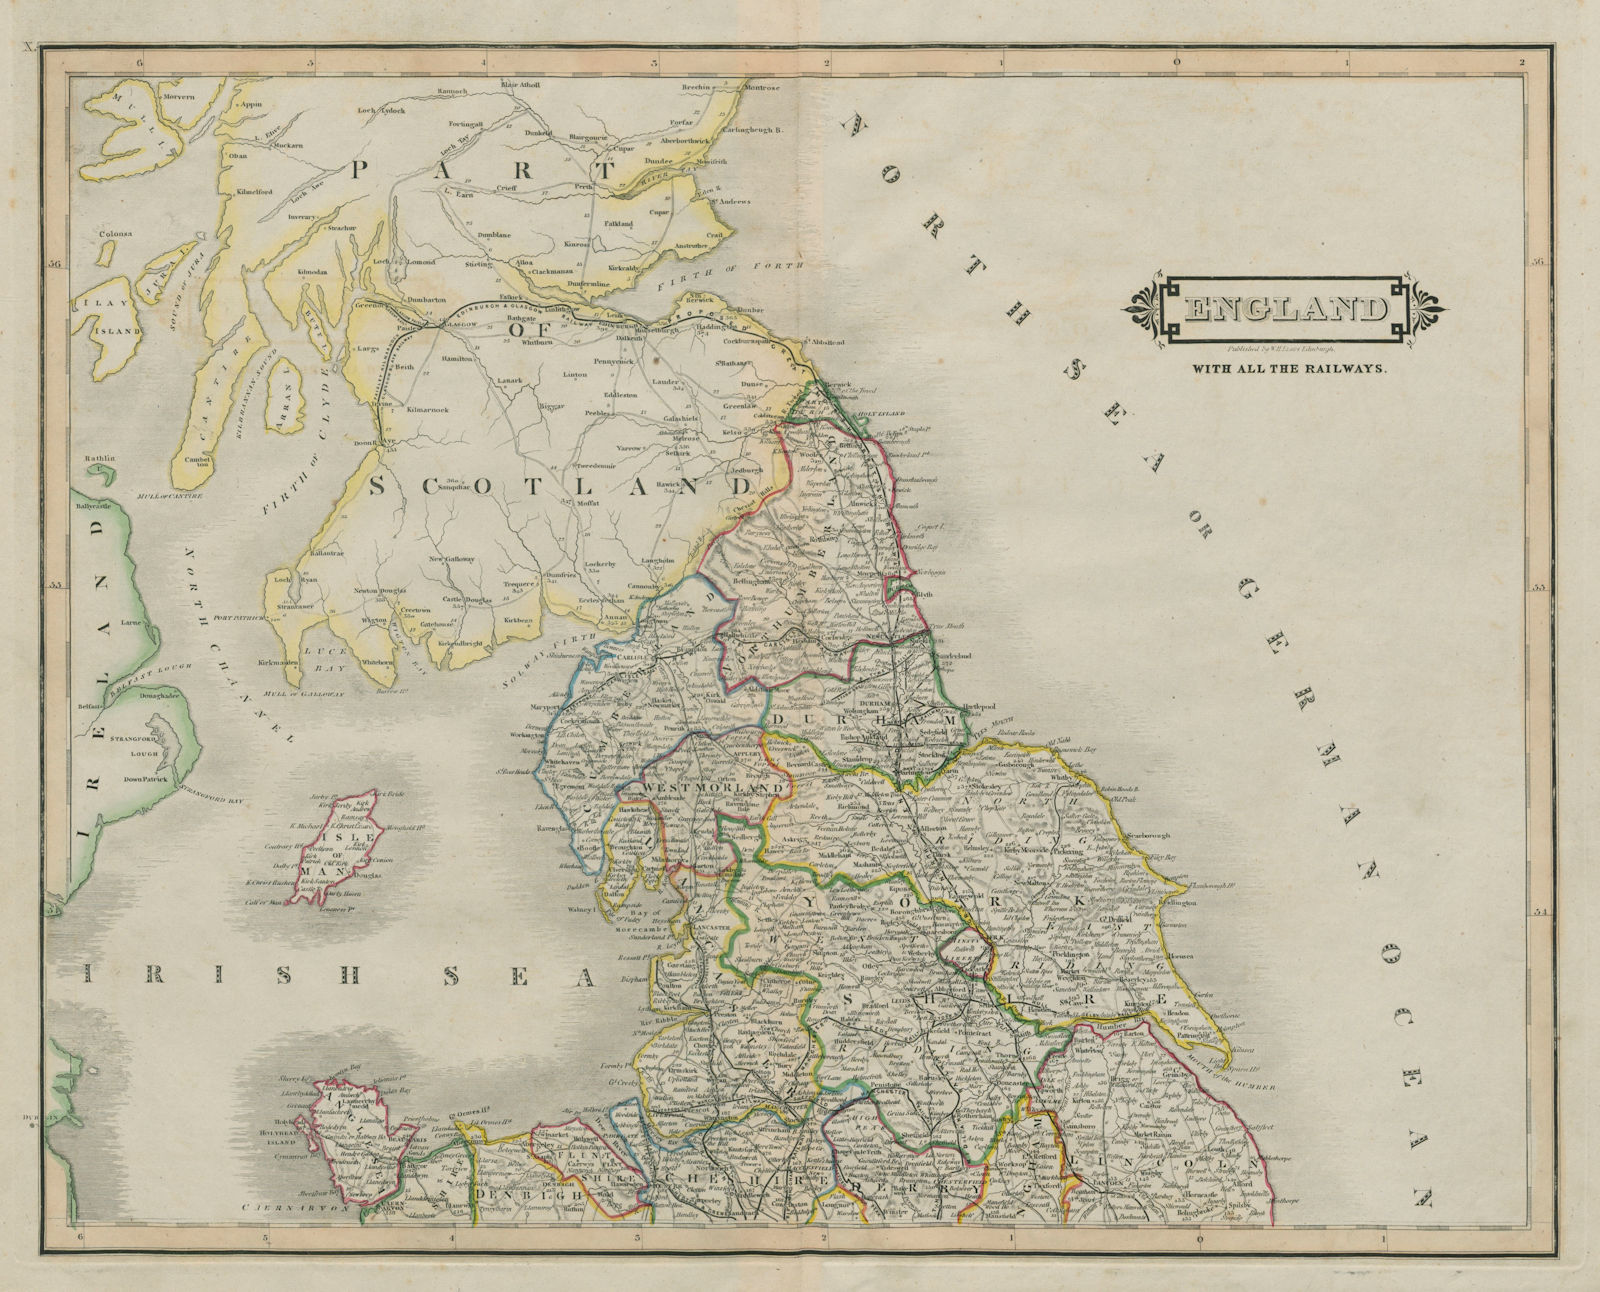 Associate Product Northern England & Wales with all the railways. LIZARS 1842 old antique map